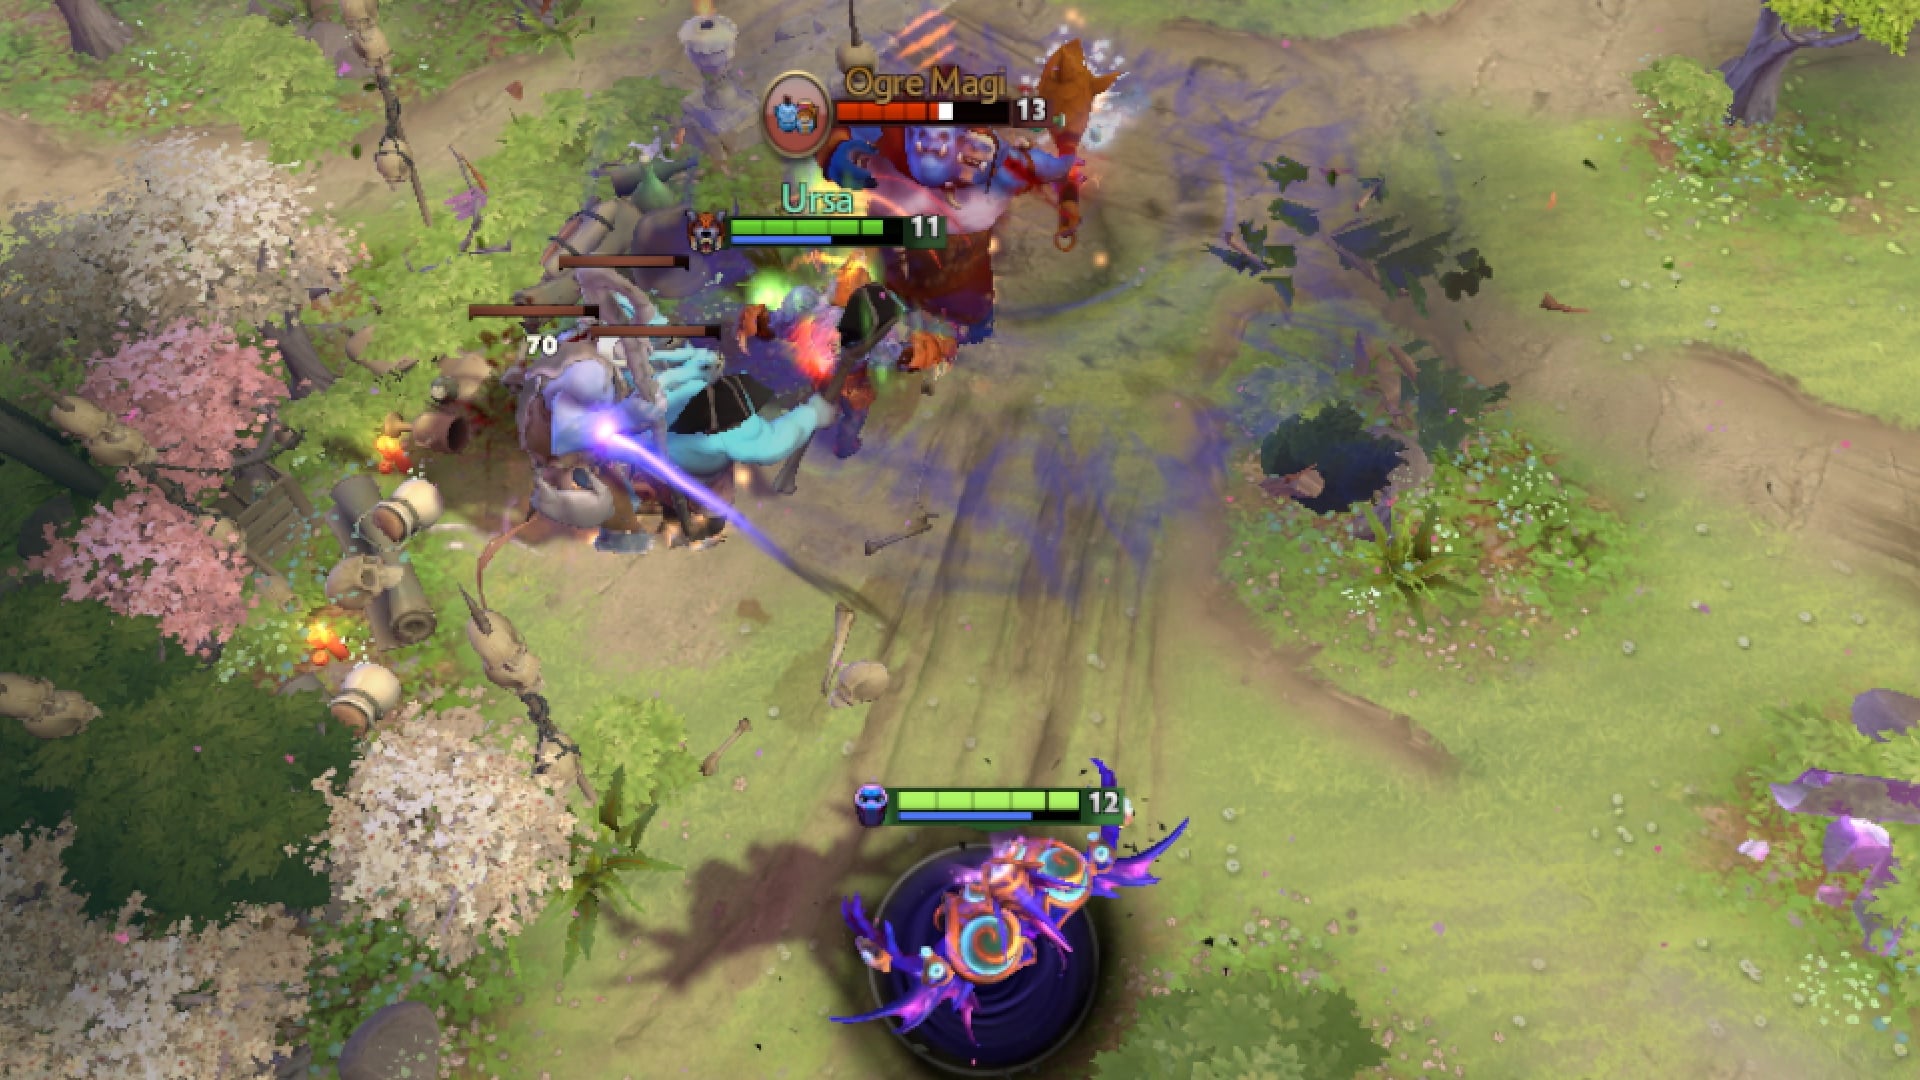 Ursa smashes enemies who are stunned by Enigma